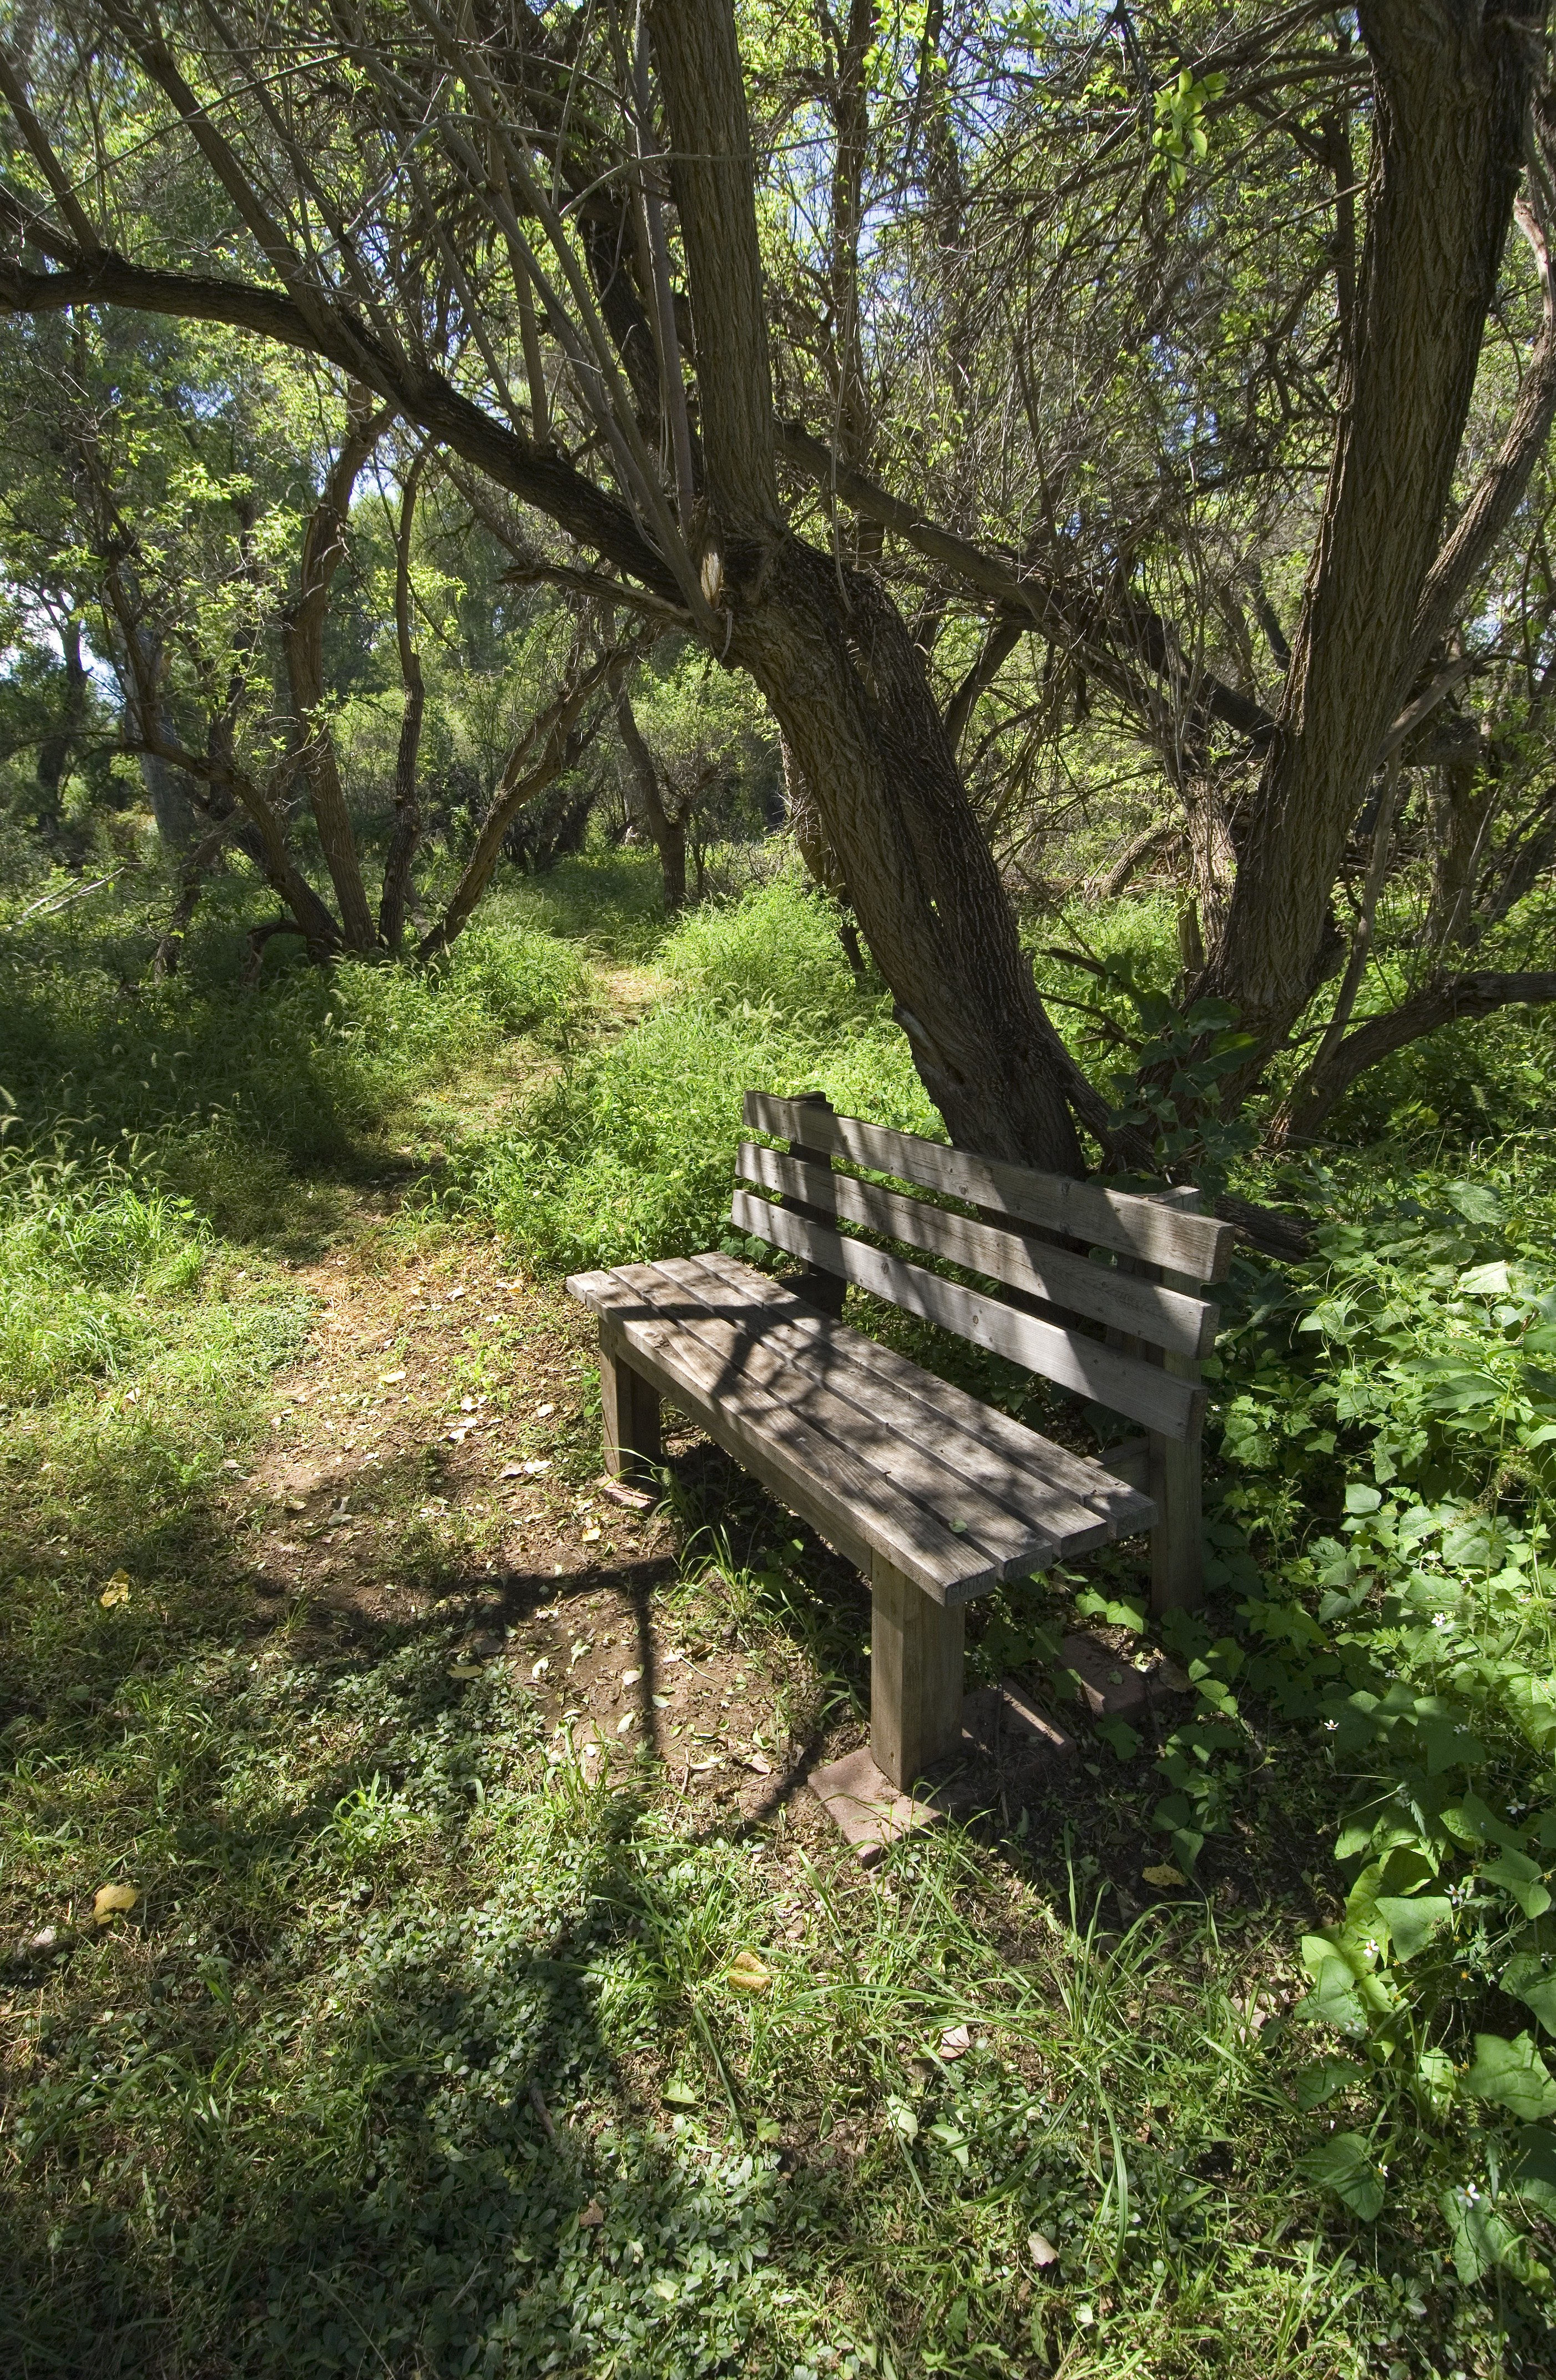 A wooden bench sits alongside a trail, green with vegetation.